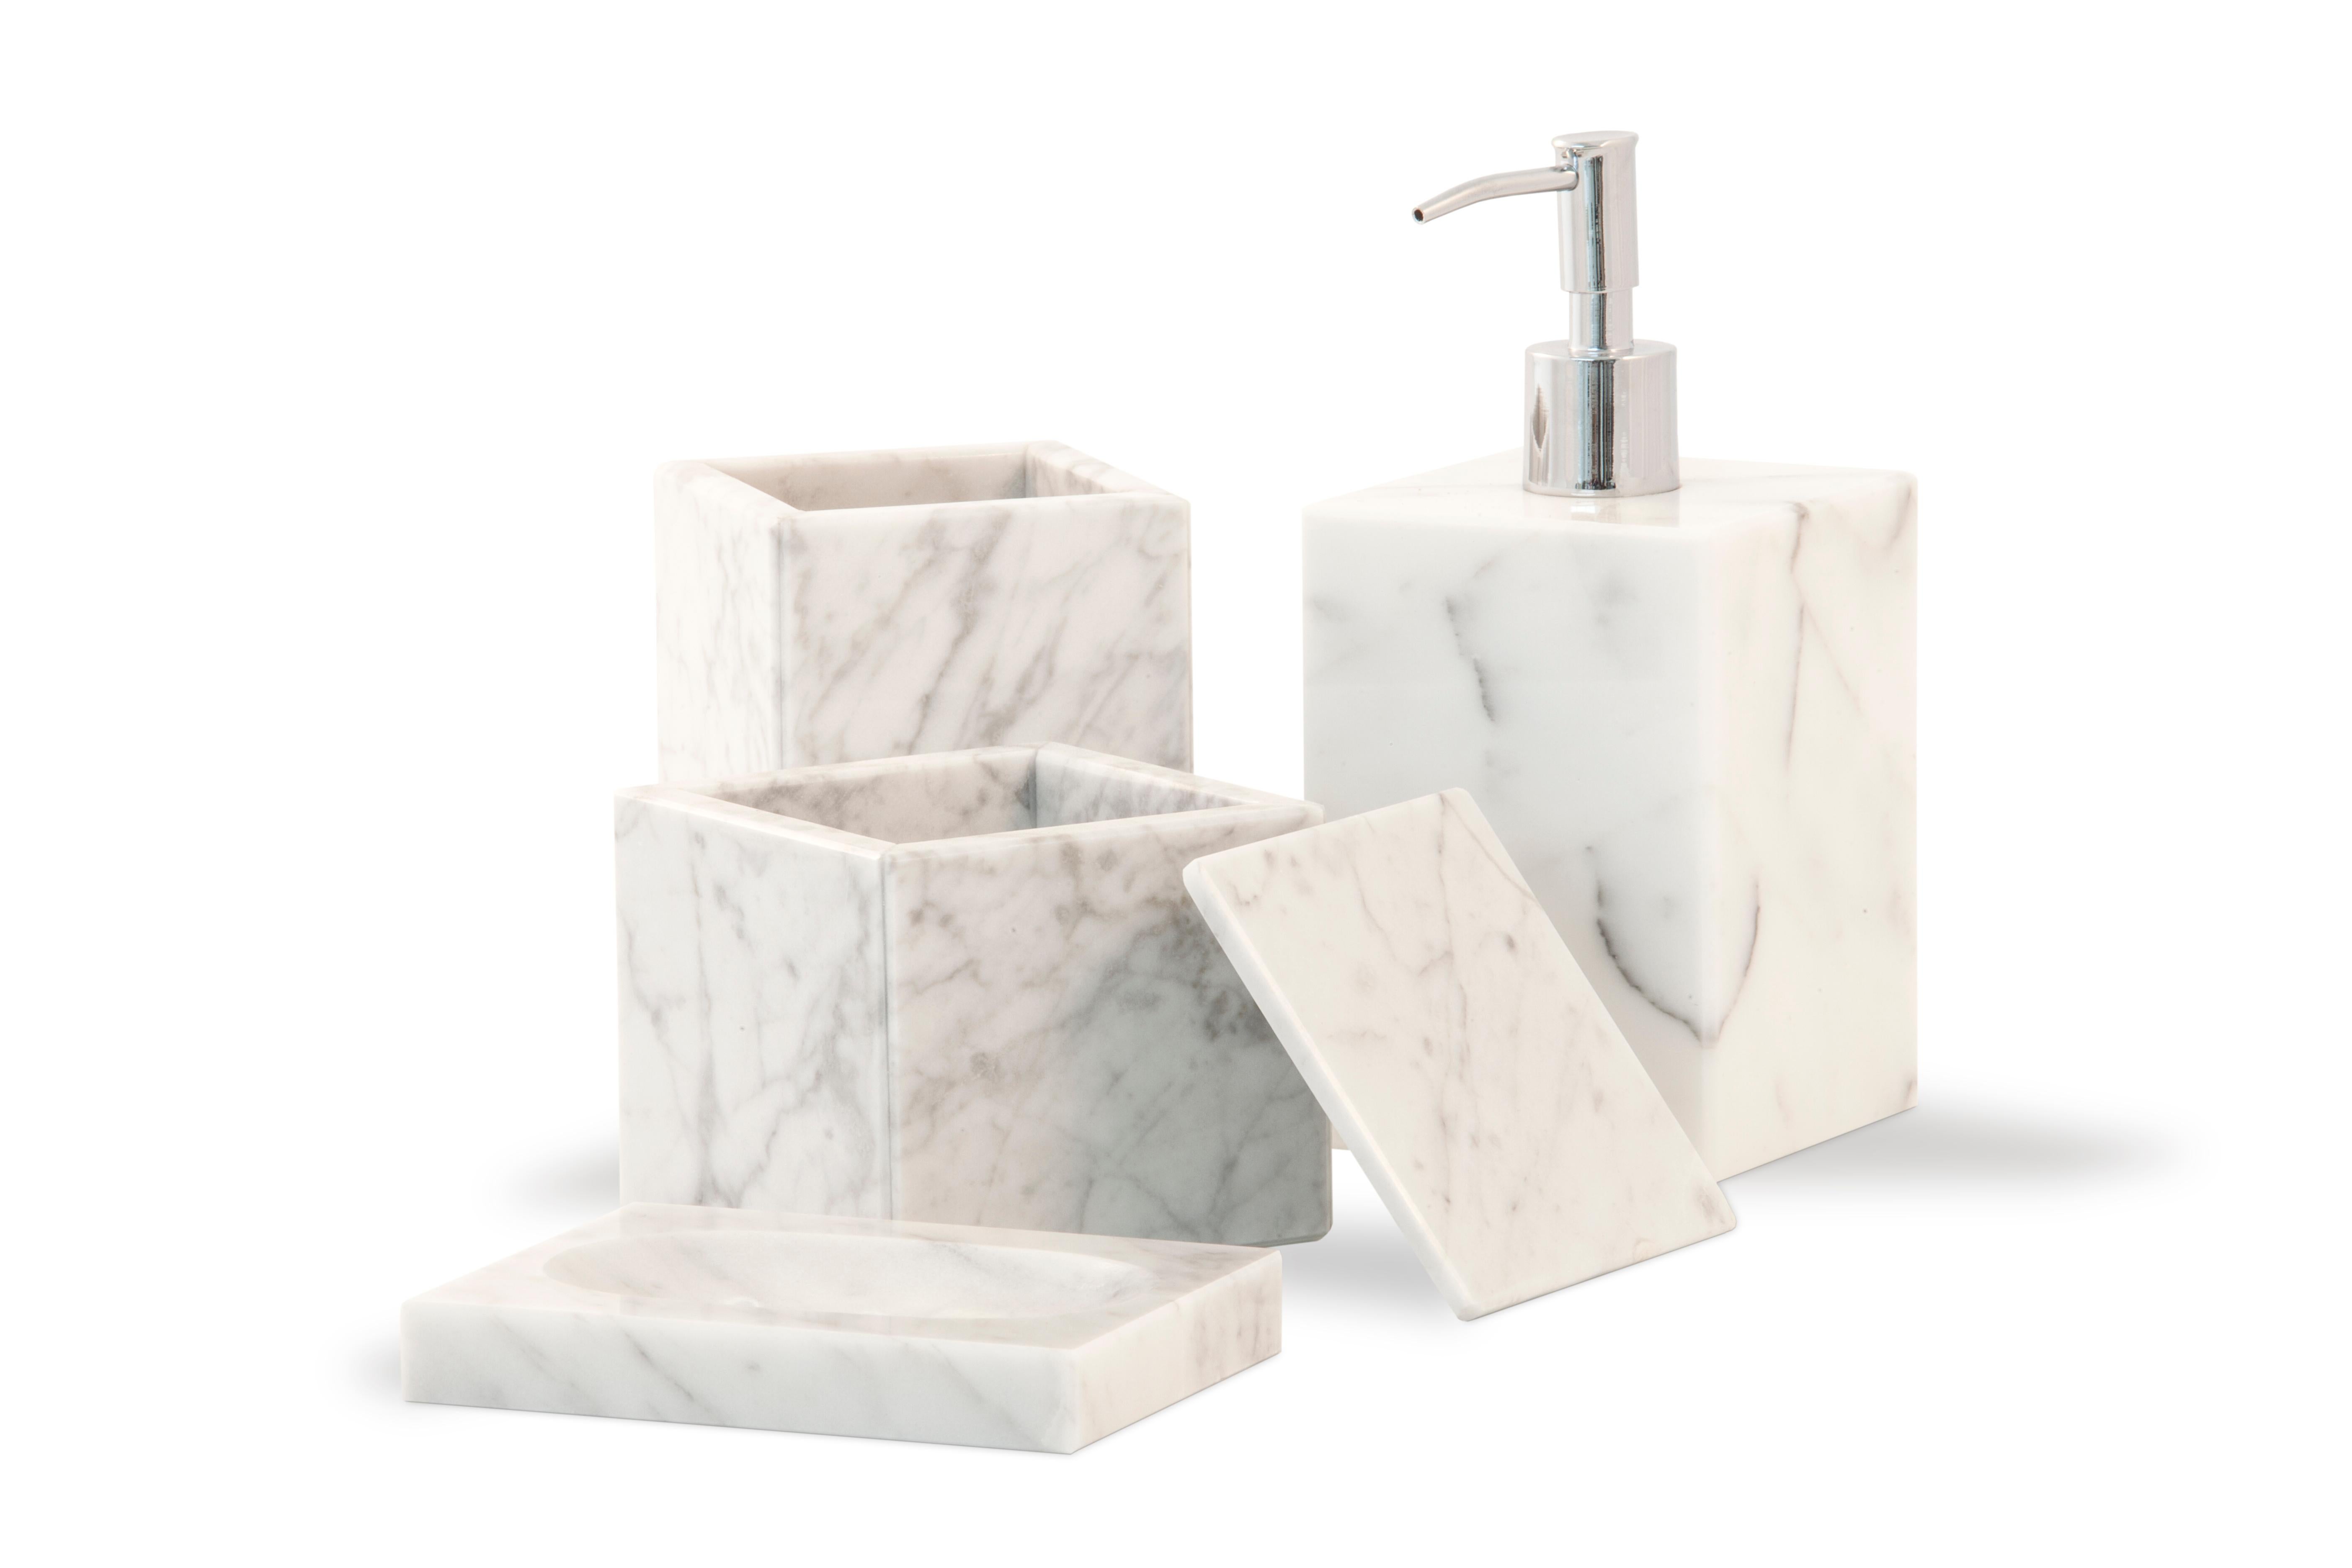 A squared shape toothbrush holder in white Carrara marble.
Each piece is in a way unique (since each marble block is different in veins and shades) and handcrafted in Italy. Slight variations in shape, color and size are to be considered a